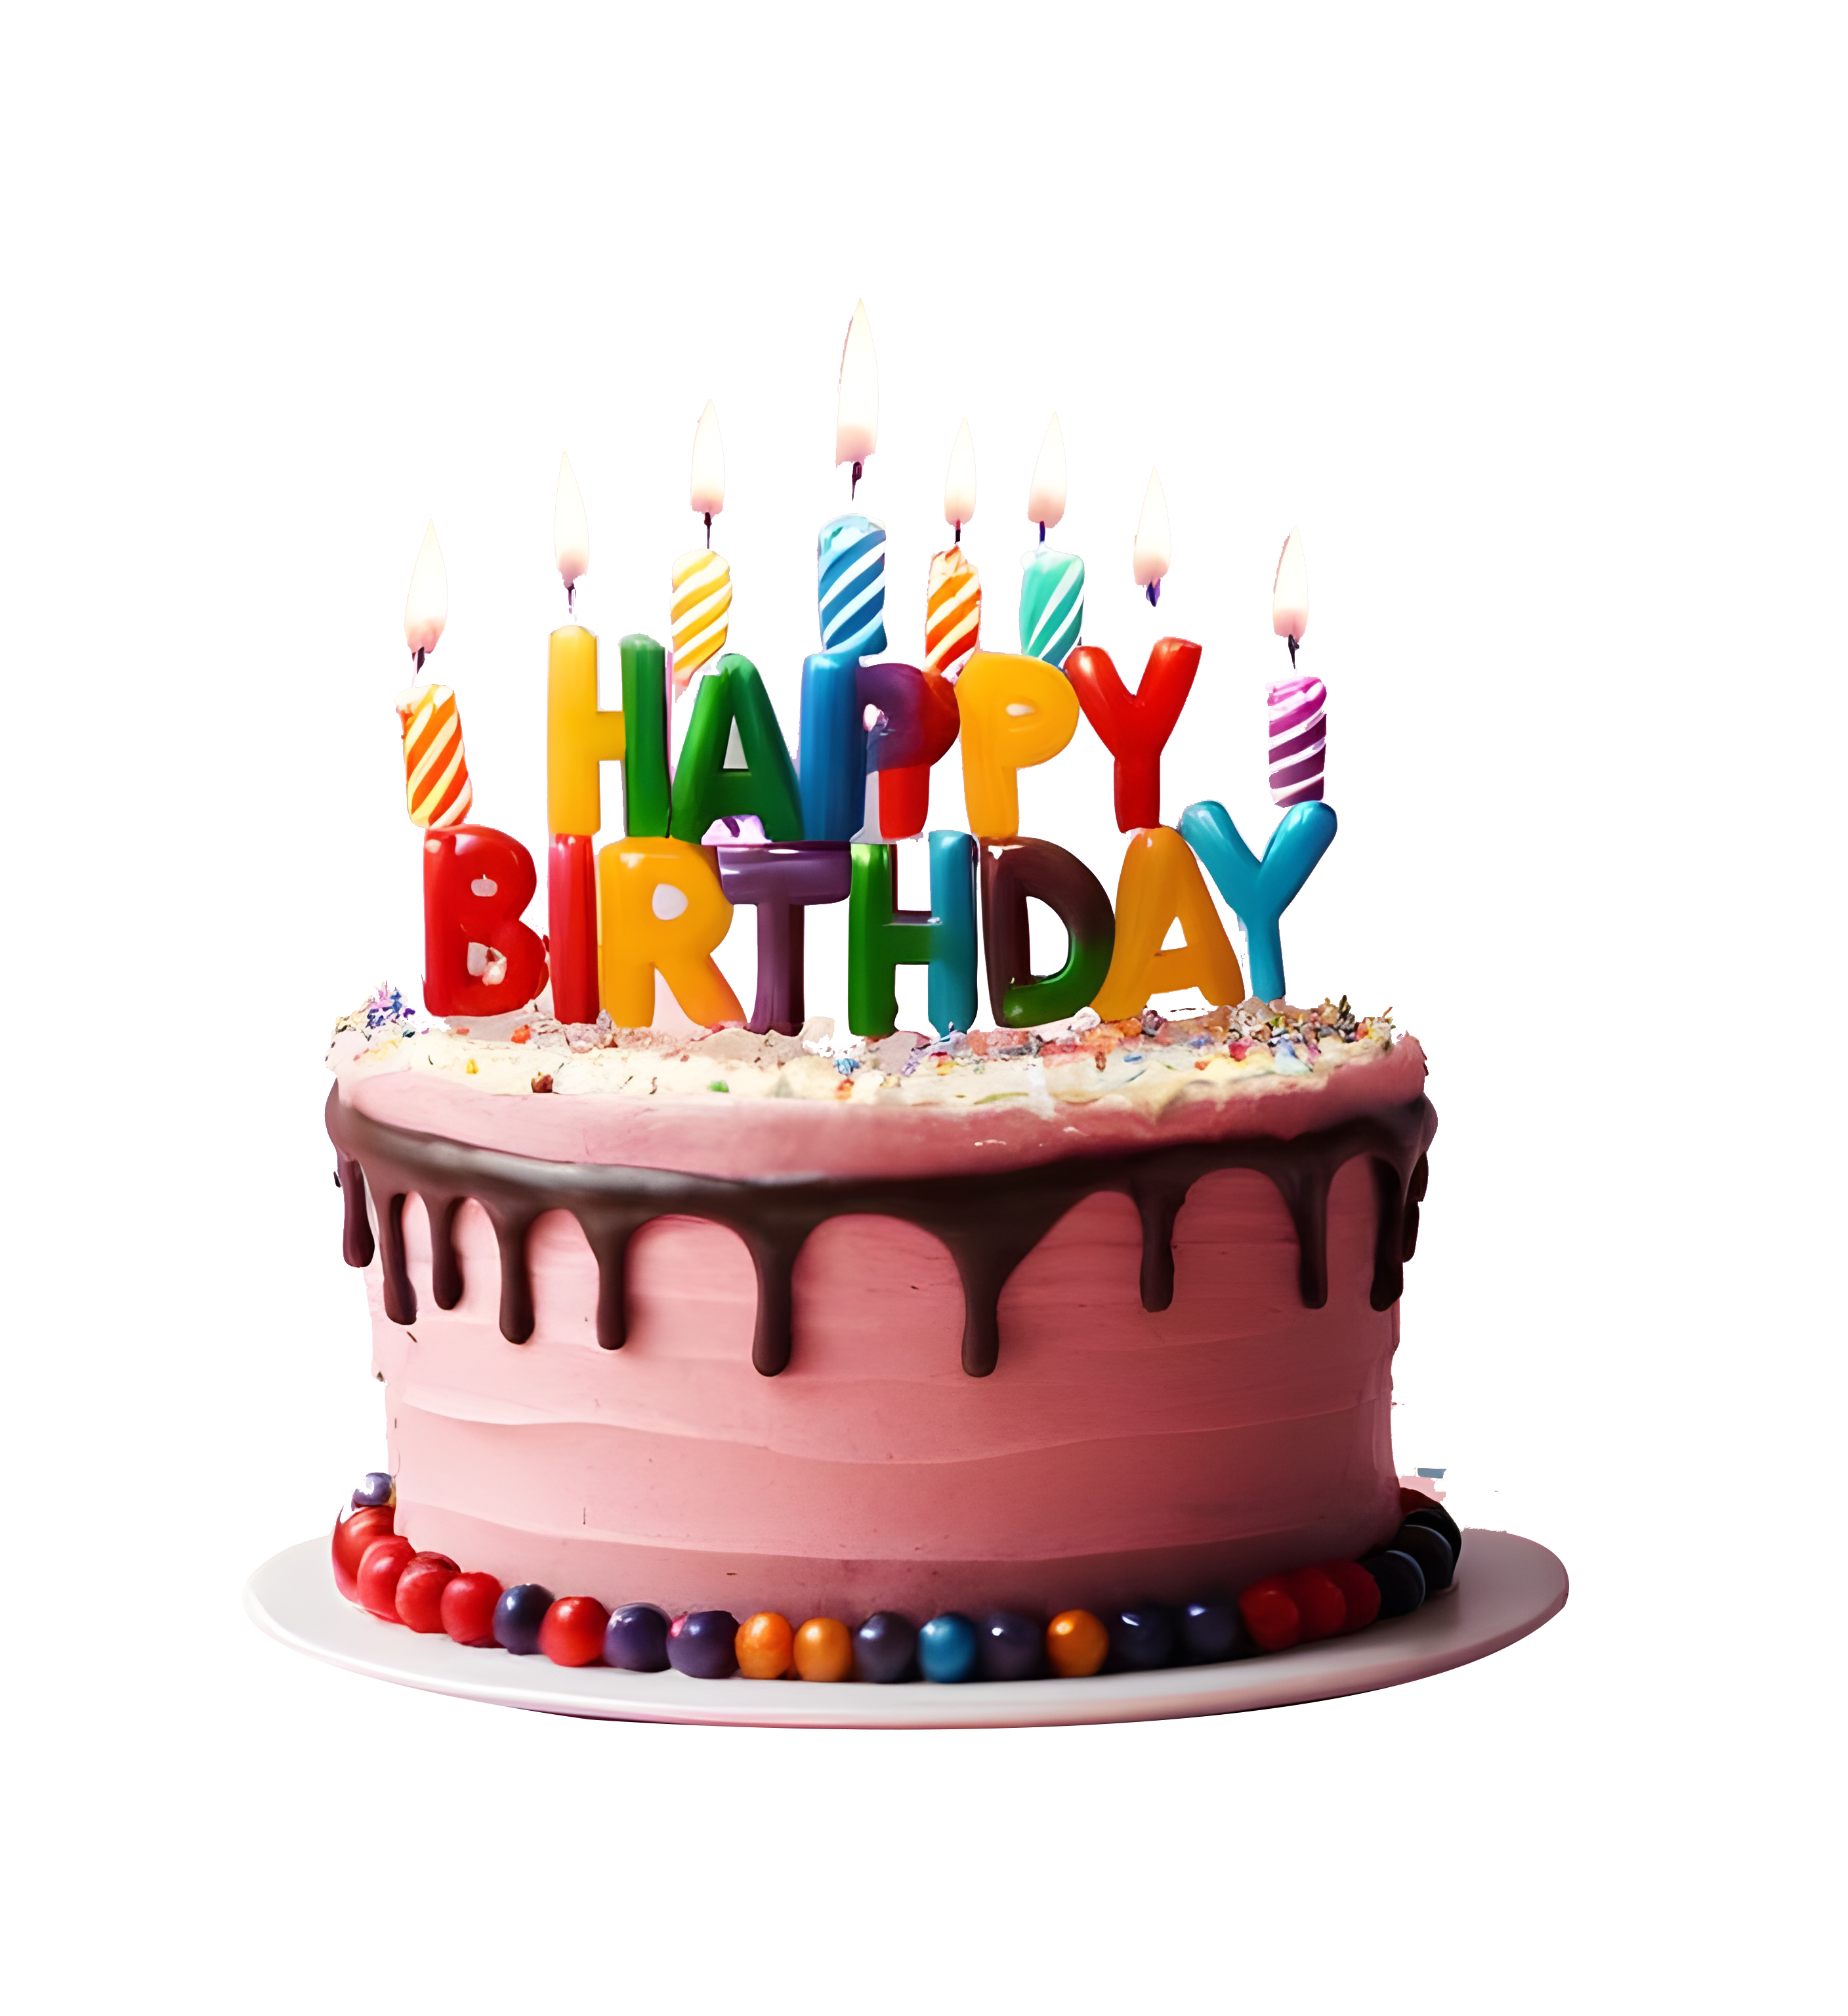 Free PNG Download: Happy Birthday Cake Image